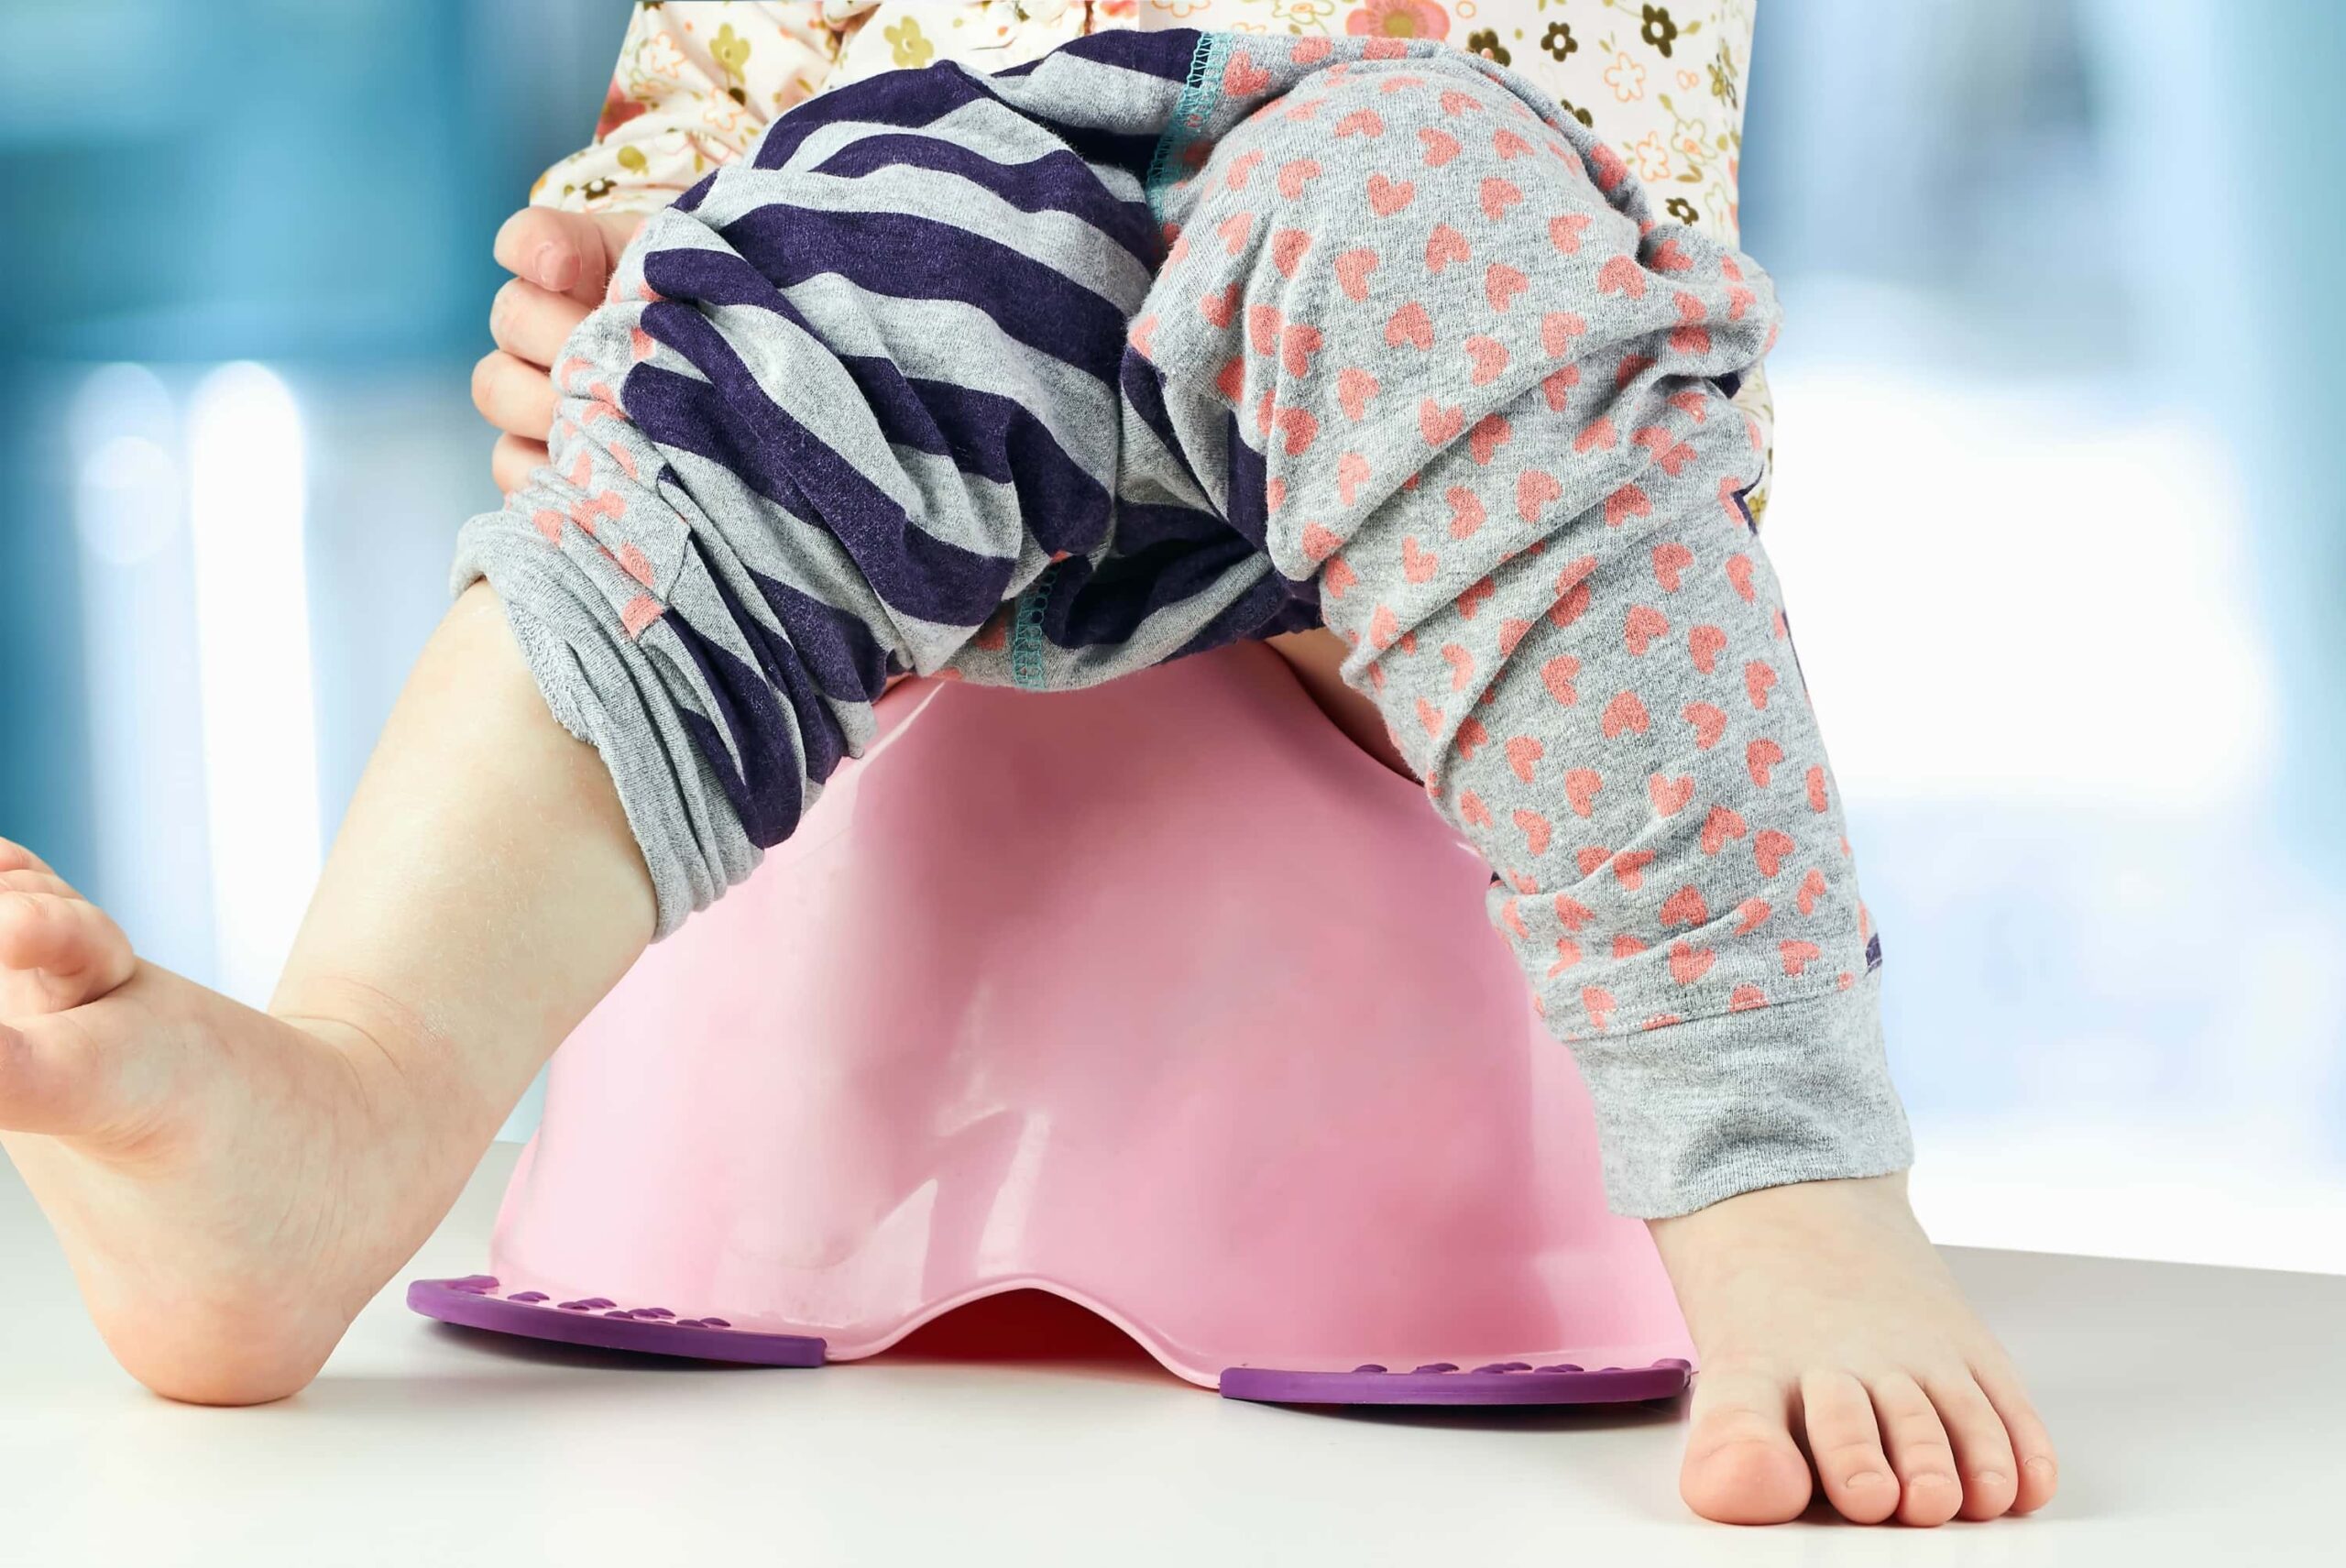 How to Conquer Your Toddler’s Potty Training Regression